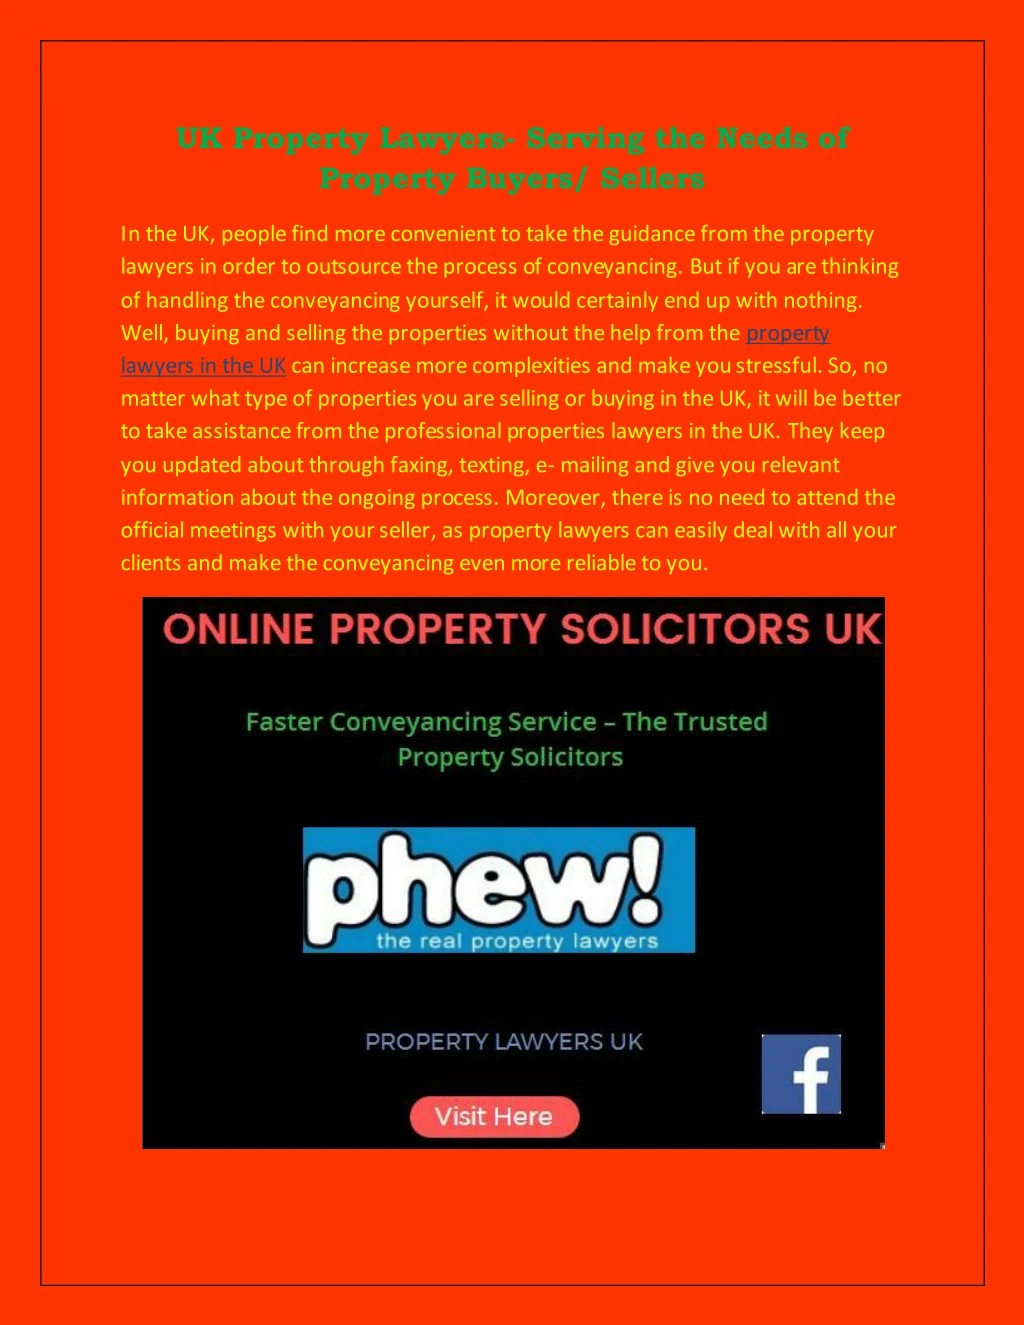 uk property lawyers serving the needs of property